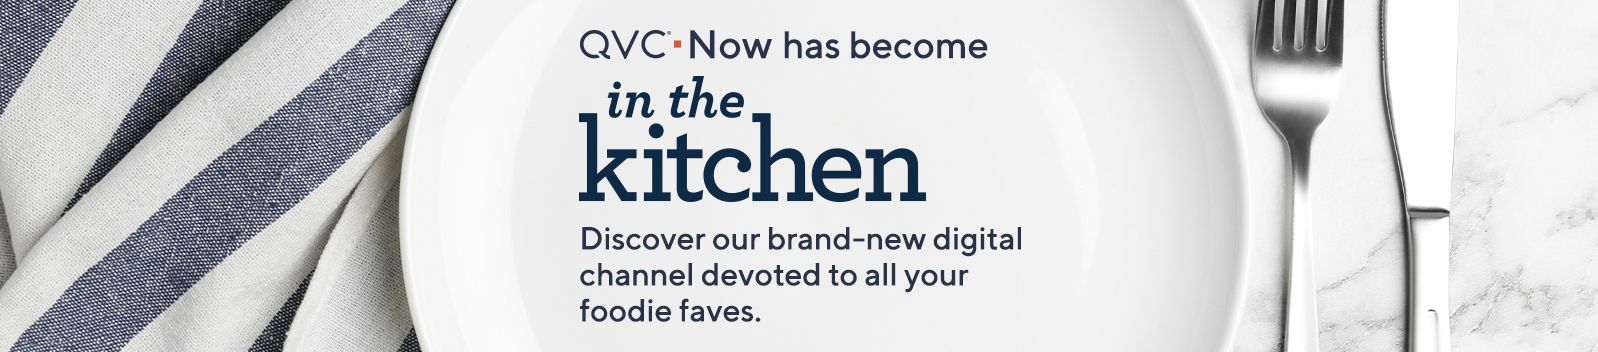 QVC® Now has become In the Kitchen®: Discover our brand-new digital channel devoted to all your foodie faves.